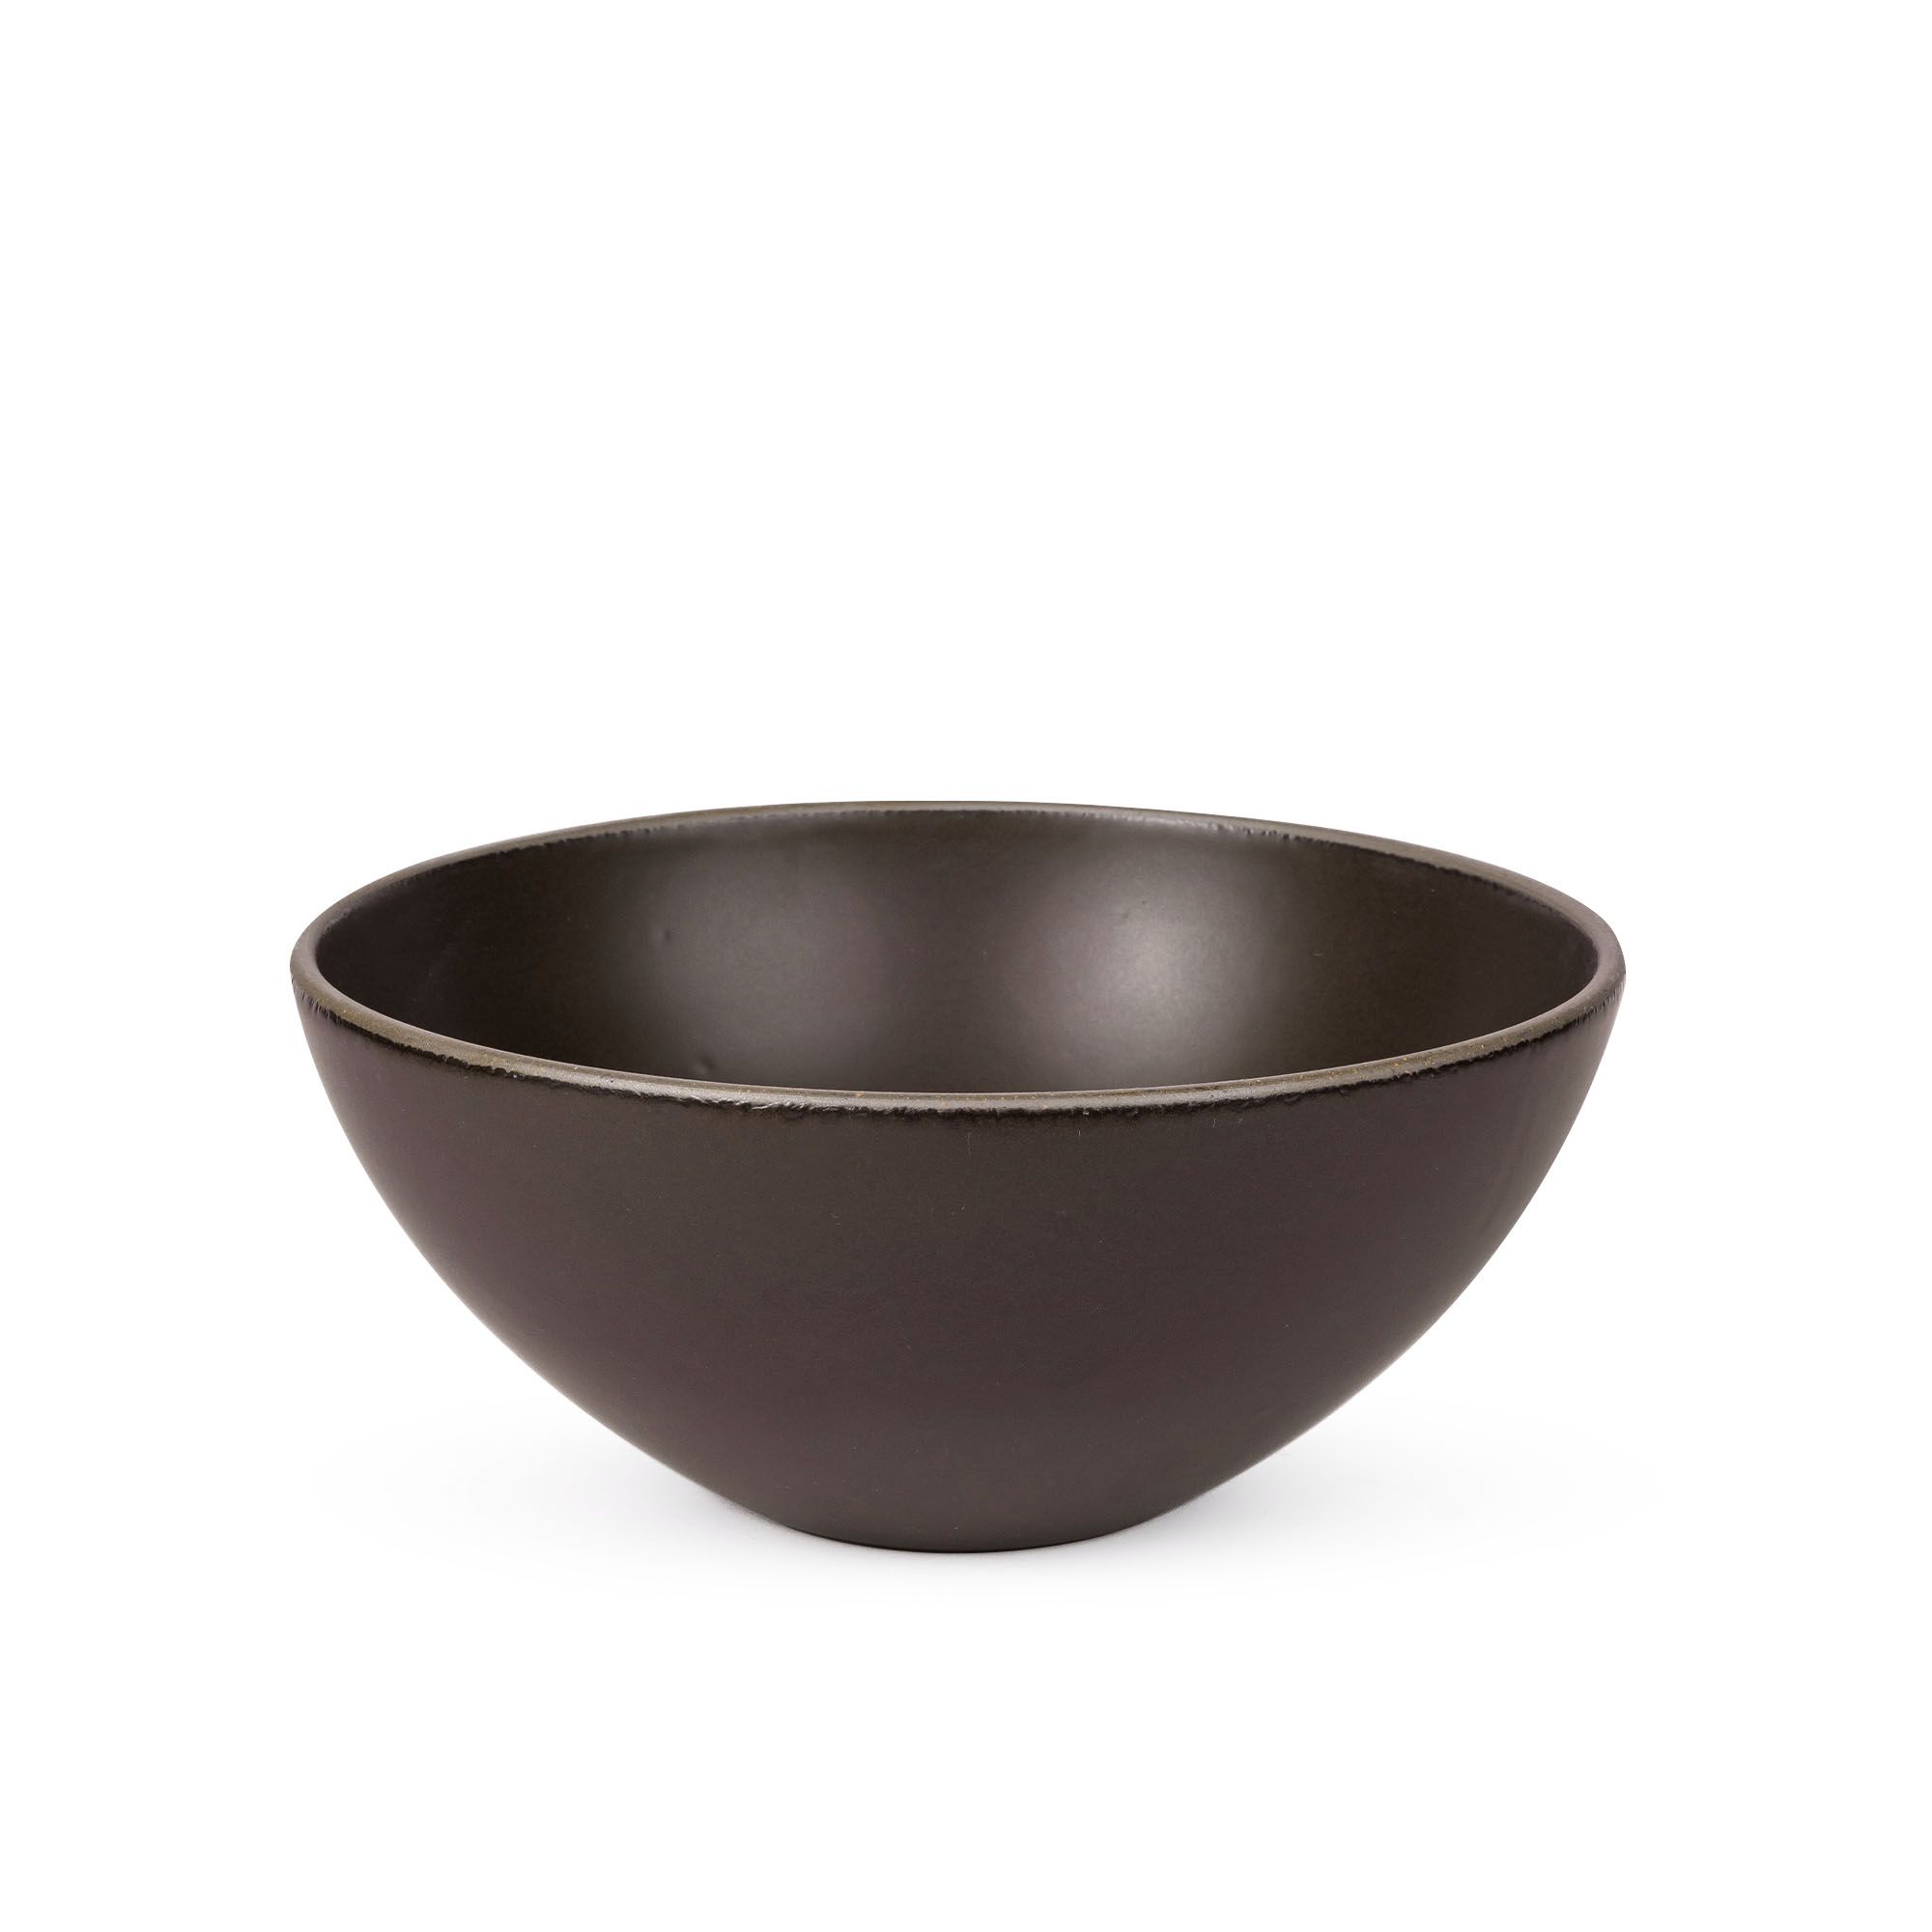 A large ceramic mixing bowl in a dark cool brown color featuring iron speckles and an unglazed rim